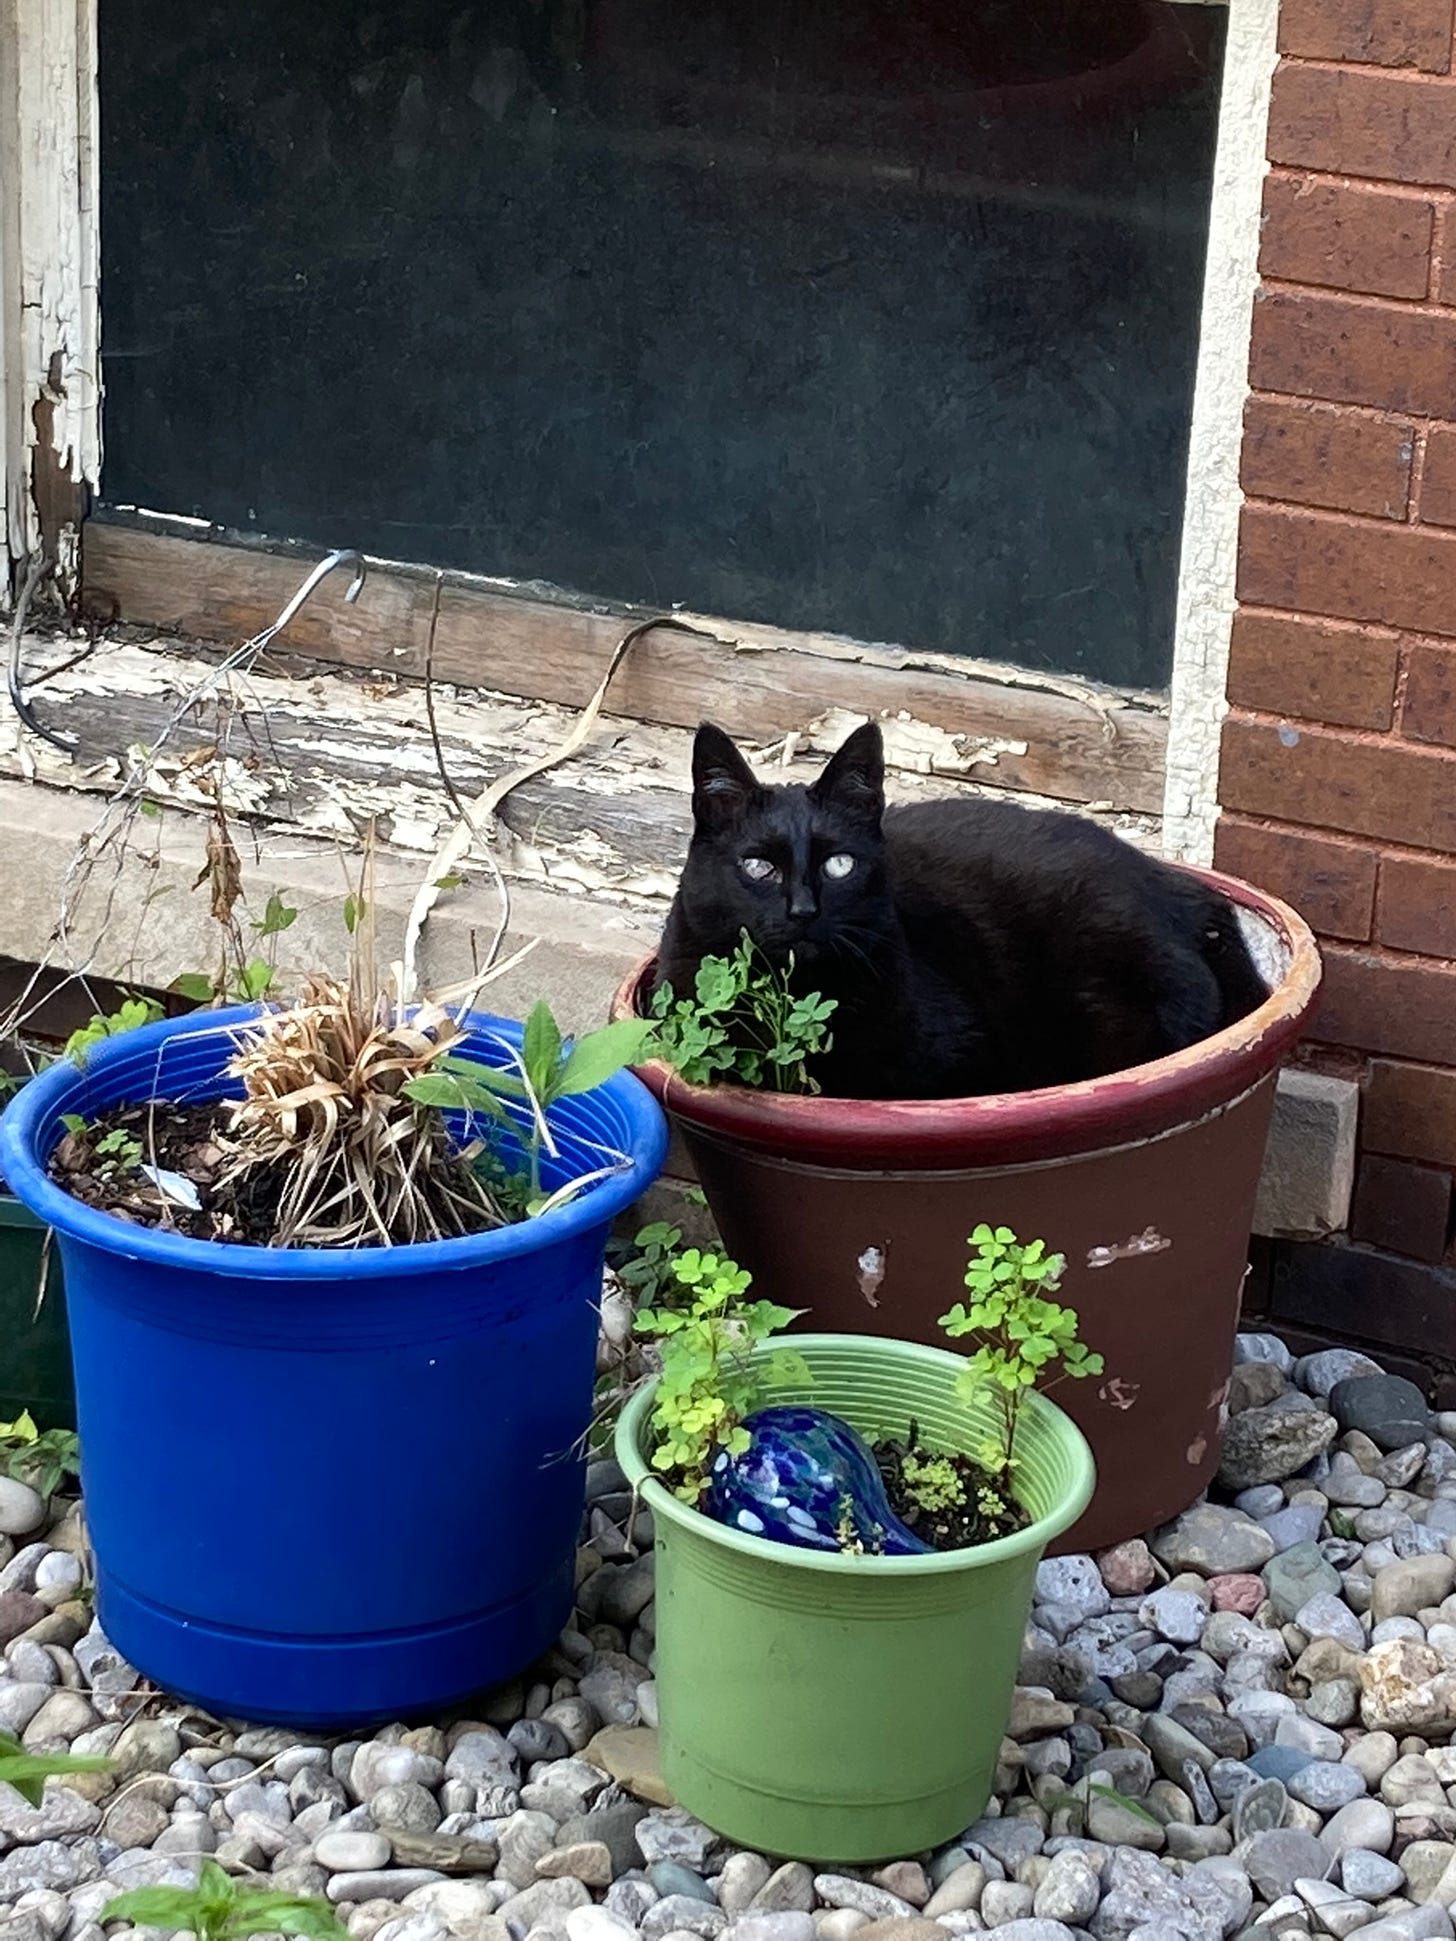 A fat, black, one-eyed cat sitting in a flower pot